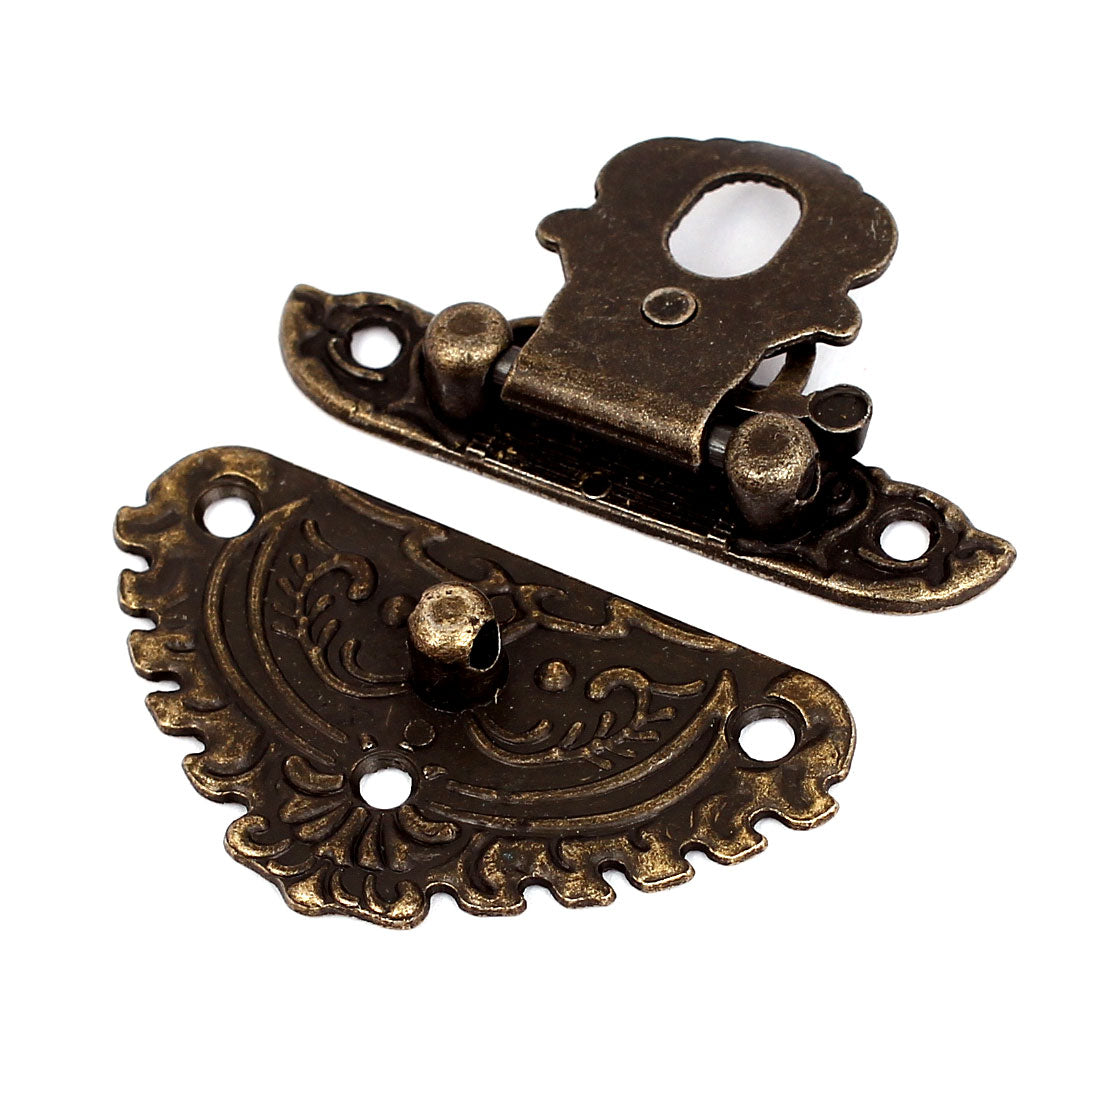 uxcell Uxcell Antique Style Wooden Case Jewelry Box Clasp Closure Hasp Latch Bronze Tone 2 Set